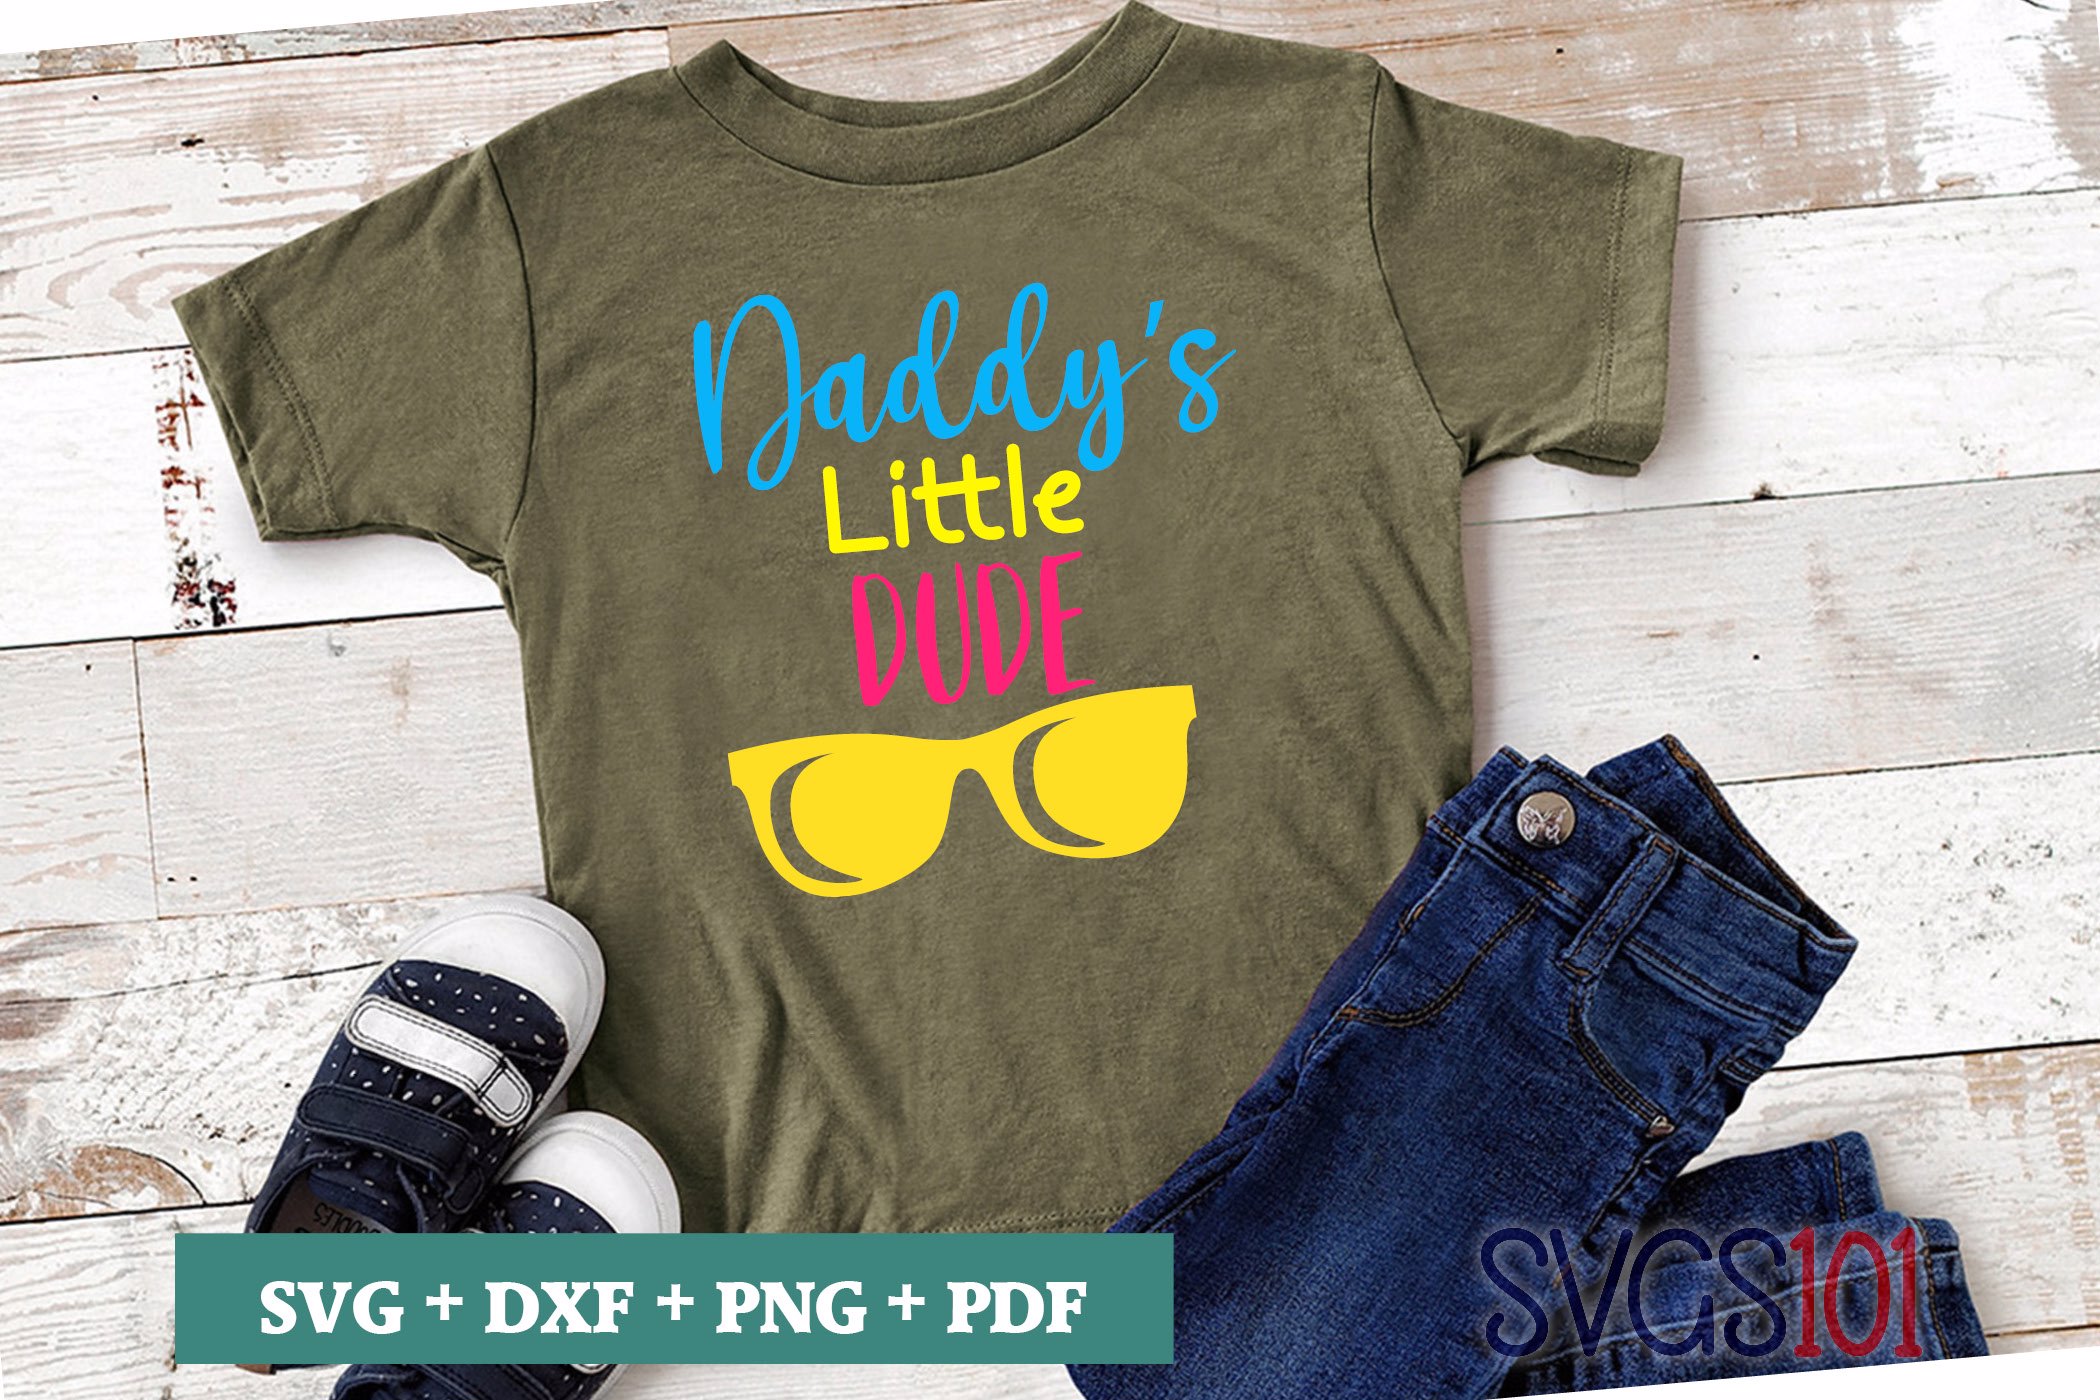 Download Daddy's Little Dude SVG Cuttable file - DXF, EPS, PNG, PDF | SVG Cutting File